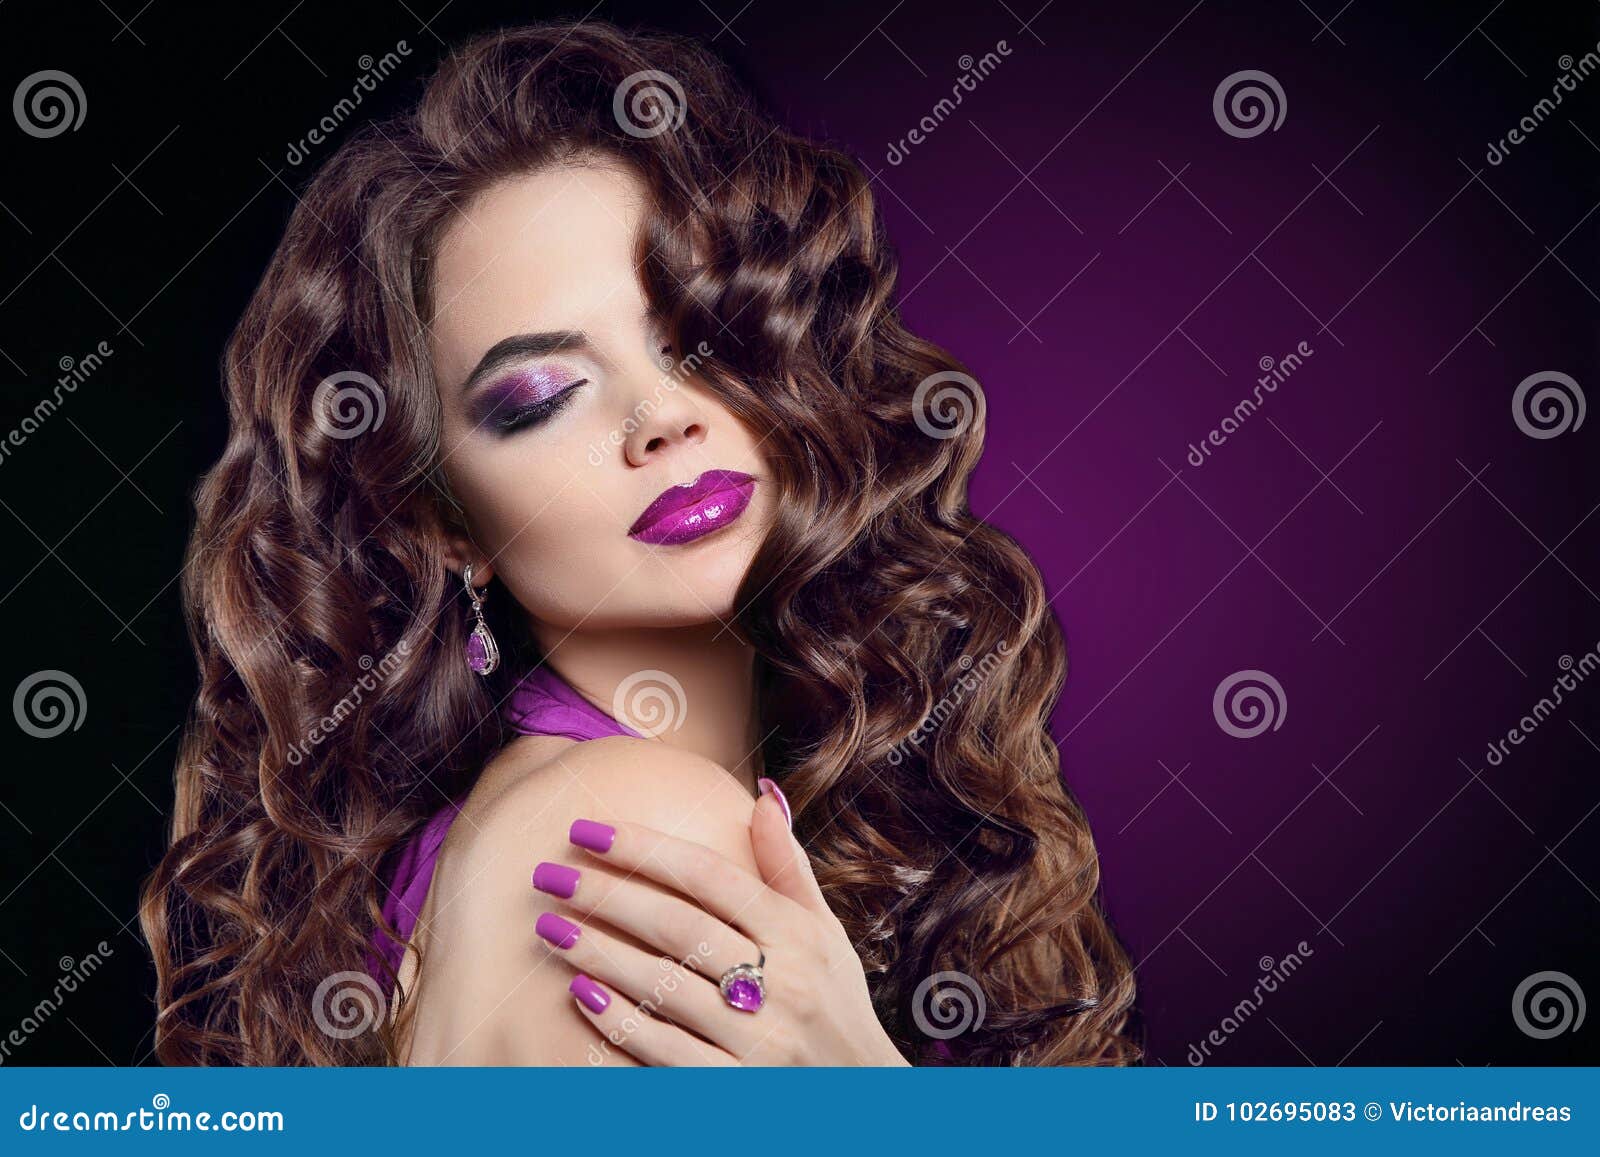 brunette with long curly hair, violet makeup, manicure nails, am